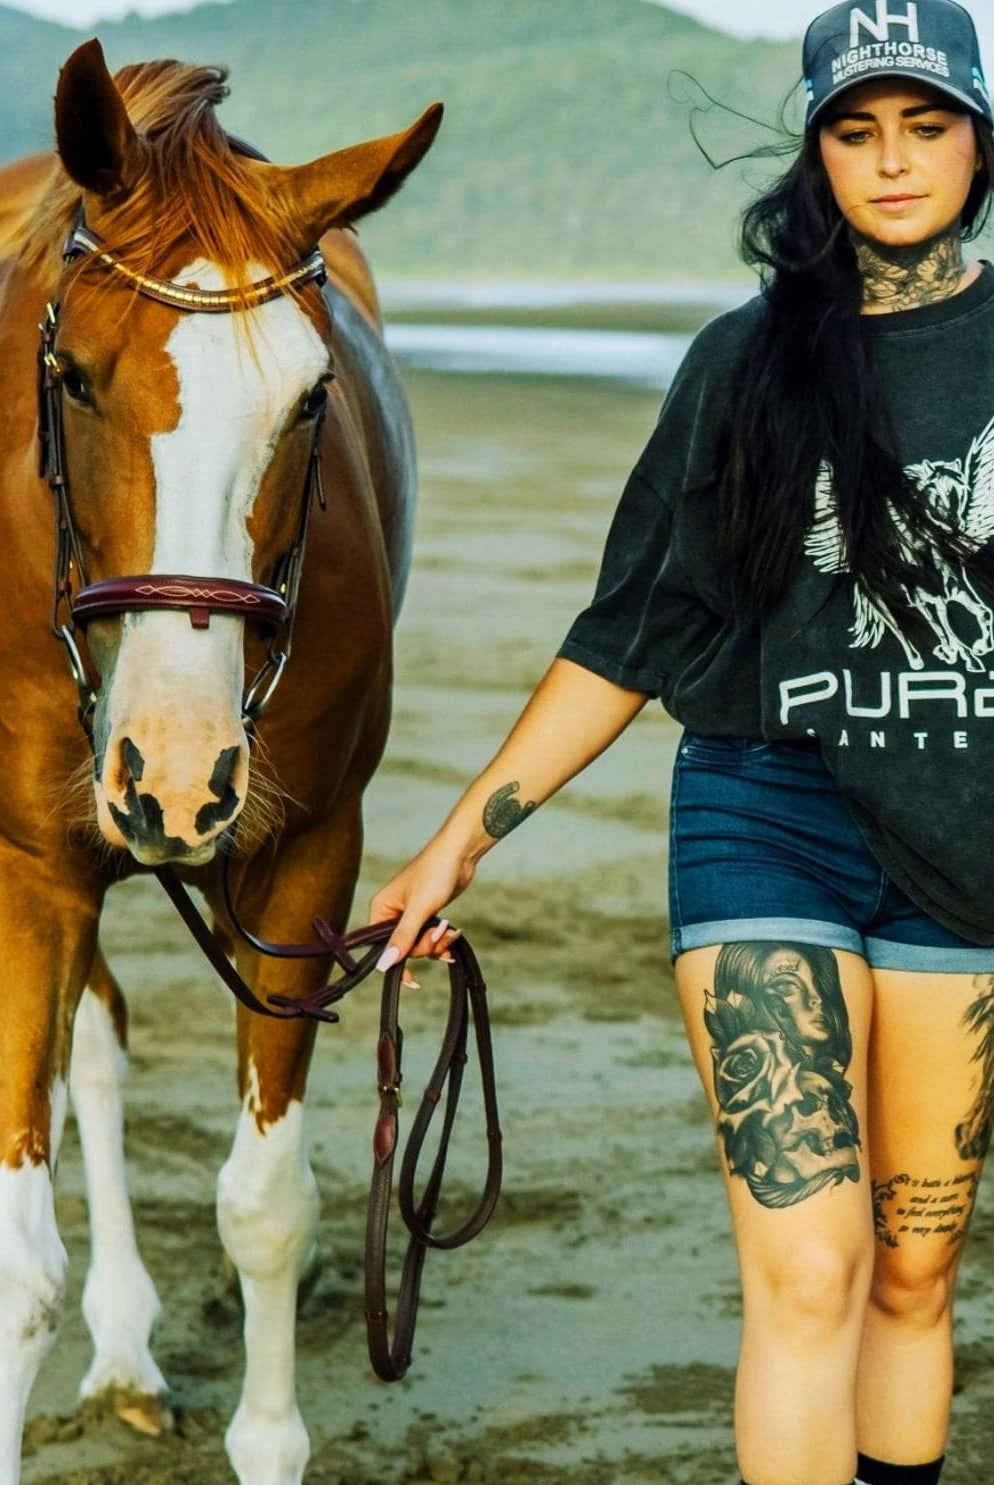 A woman with tattoos holding a brown and white horse's lead rope walks on a beach. She is wearing a black cap, super comfy PURE Boyfriend Tee by Pure Canter with a stunning design, and denim shorts. The background features a grassy landscape and hills under a cloudy sky.